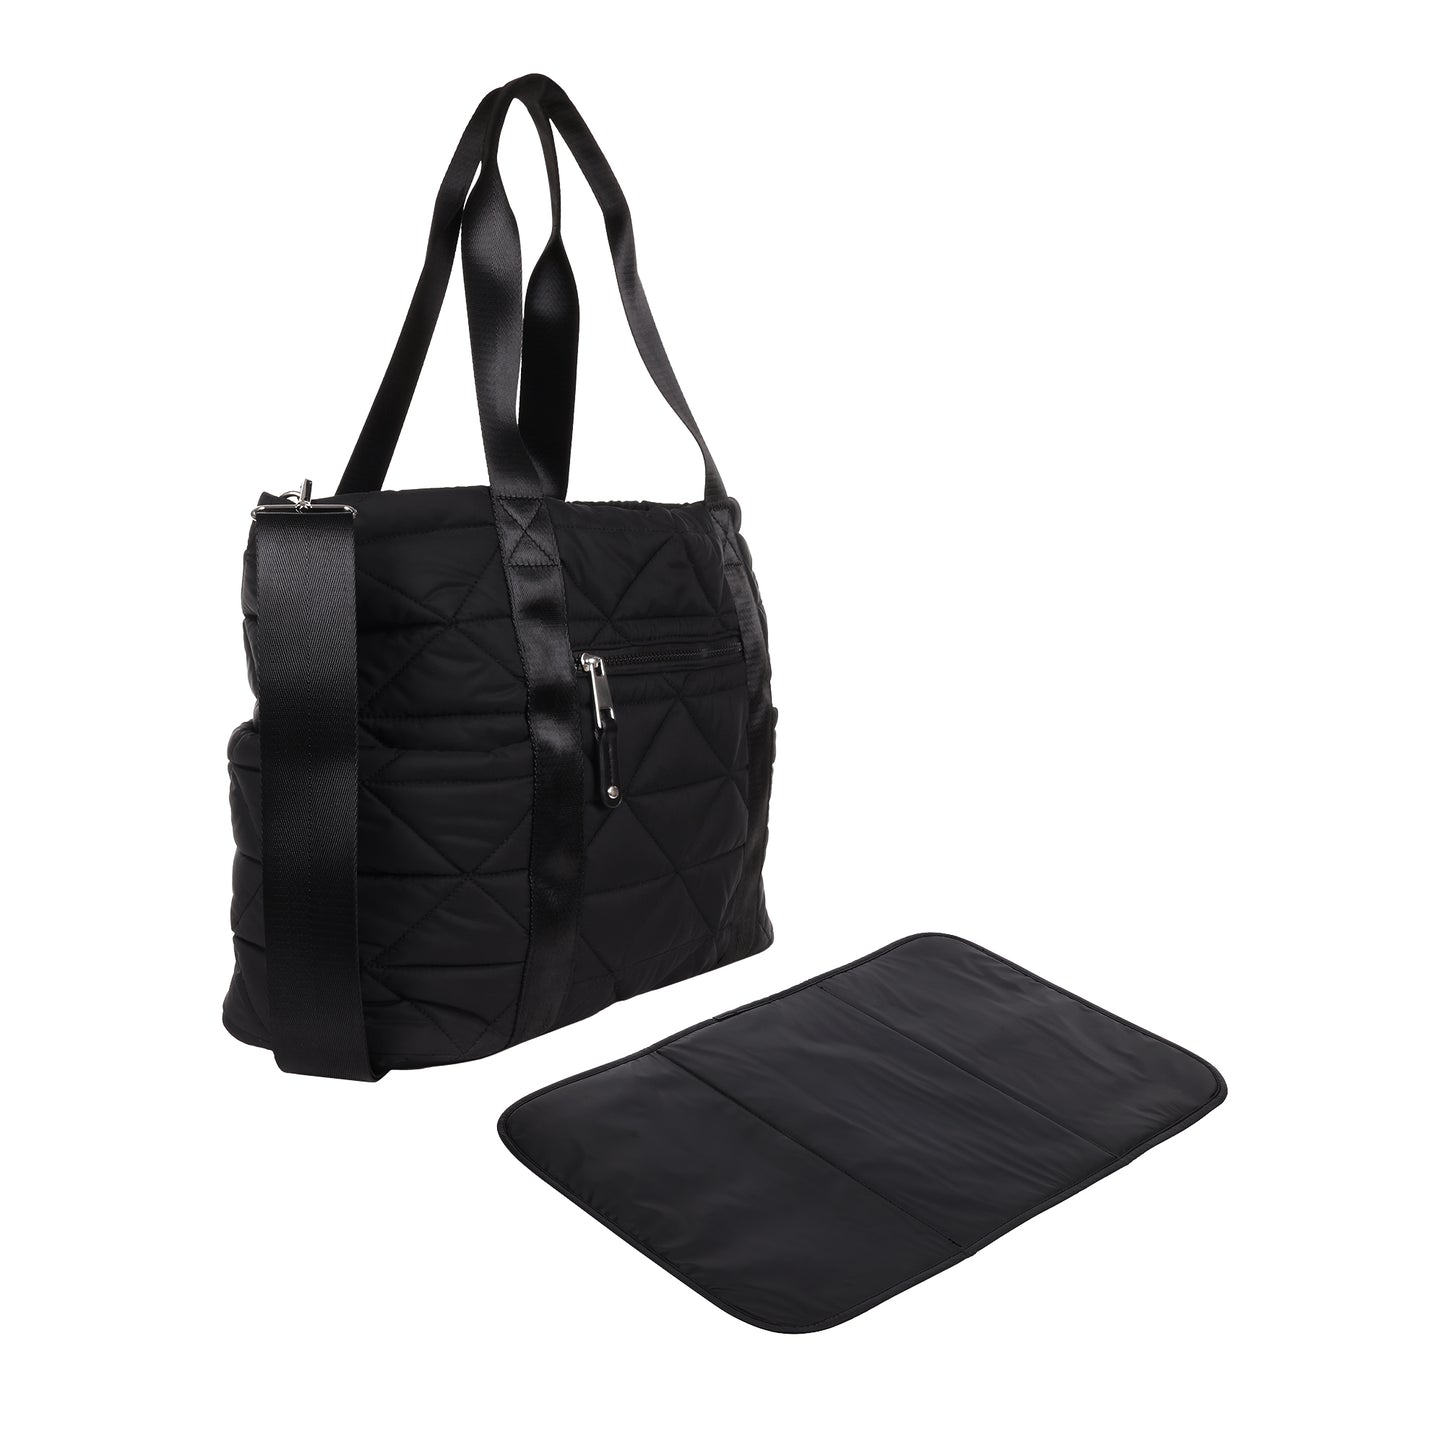 Diamond Quilted Nylon Carry-All Diaper Bag Black